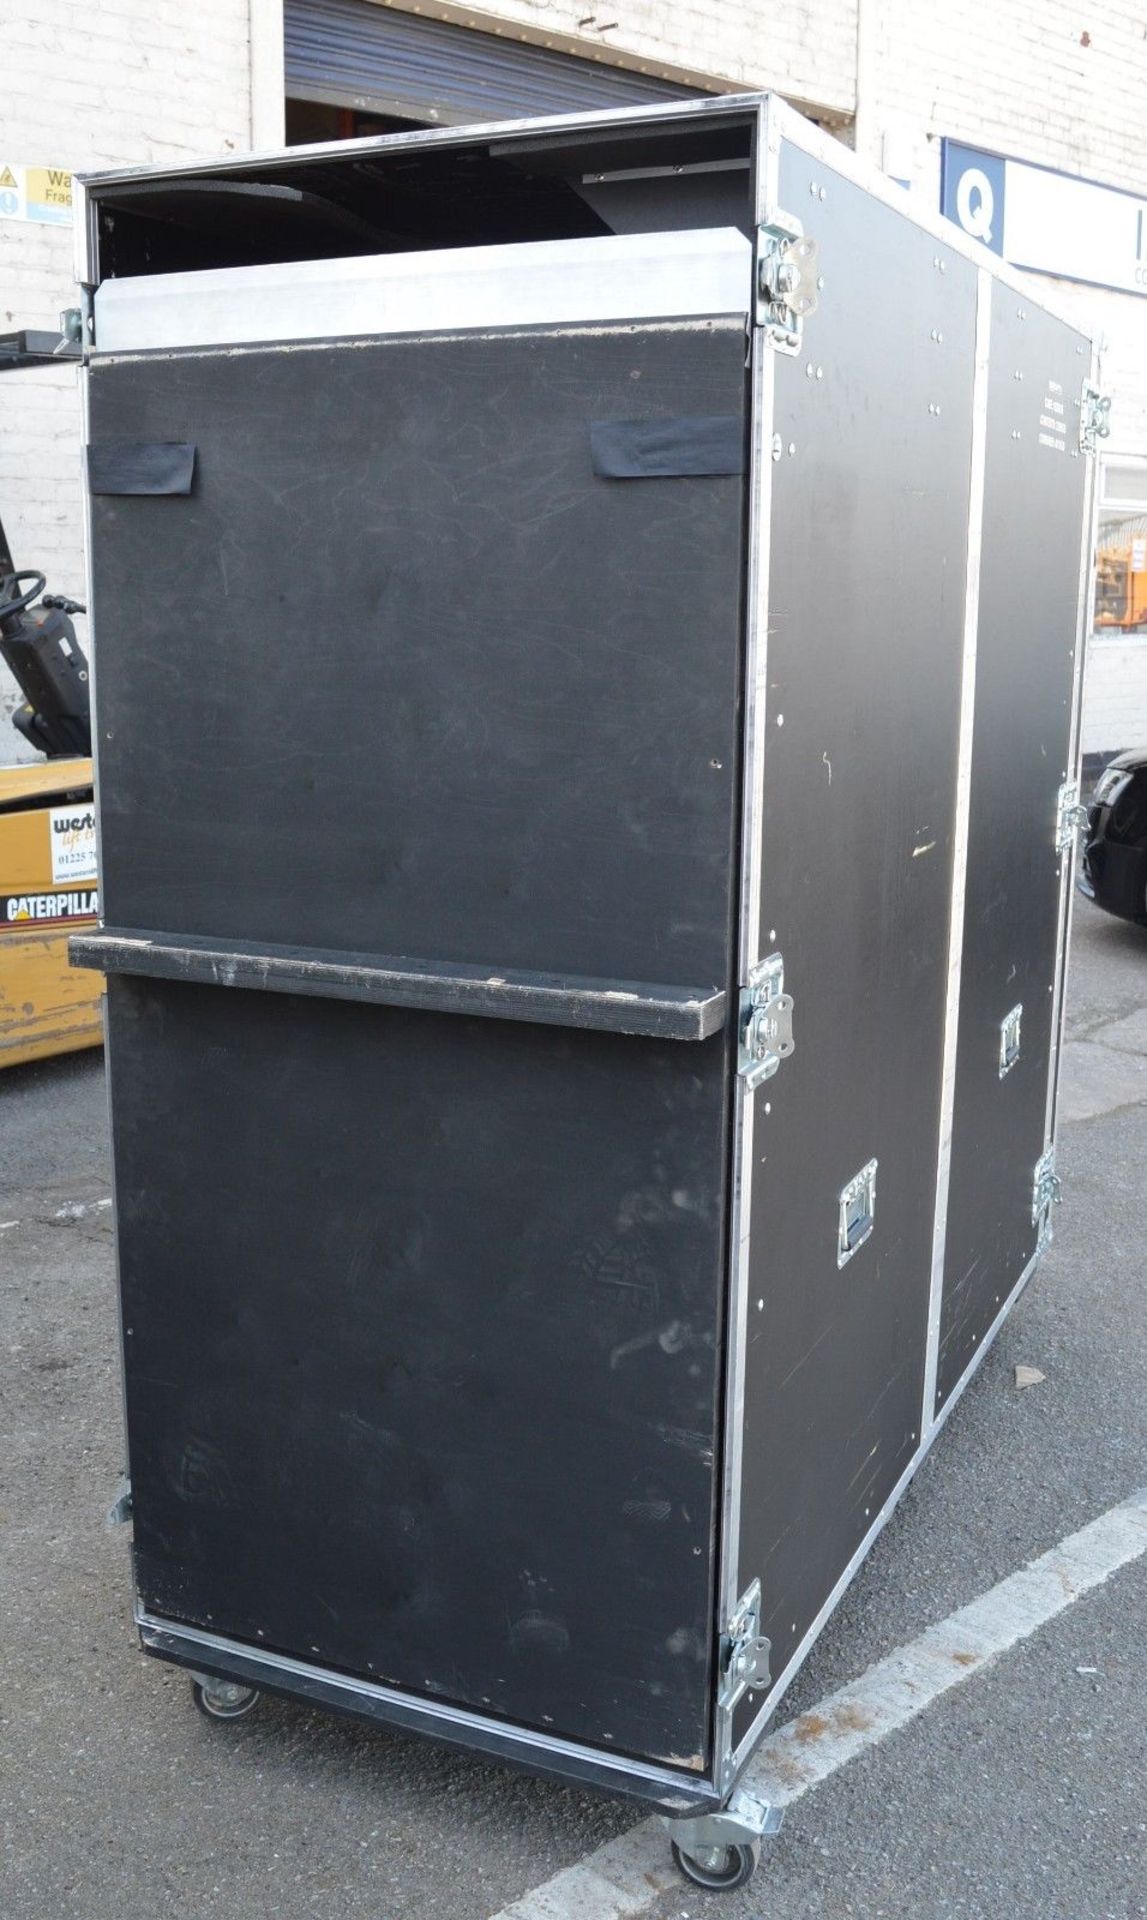 1 x Large Flight Case With Castors and Ramp For Easy Loading - H188 x W200 x D79 cms - CL011 - - Image 5 of 11